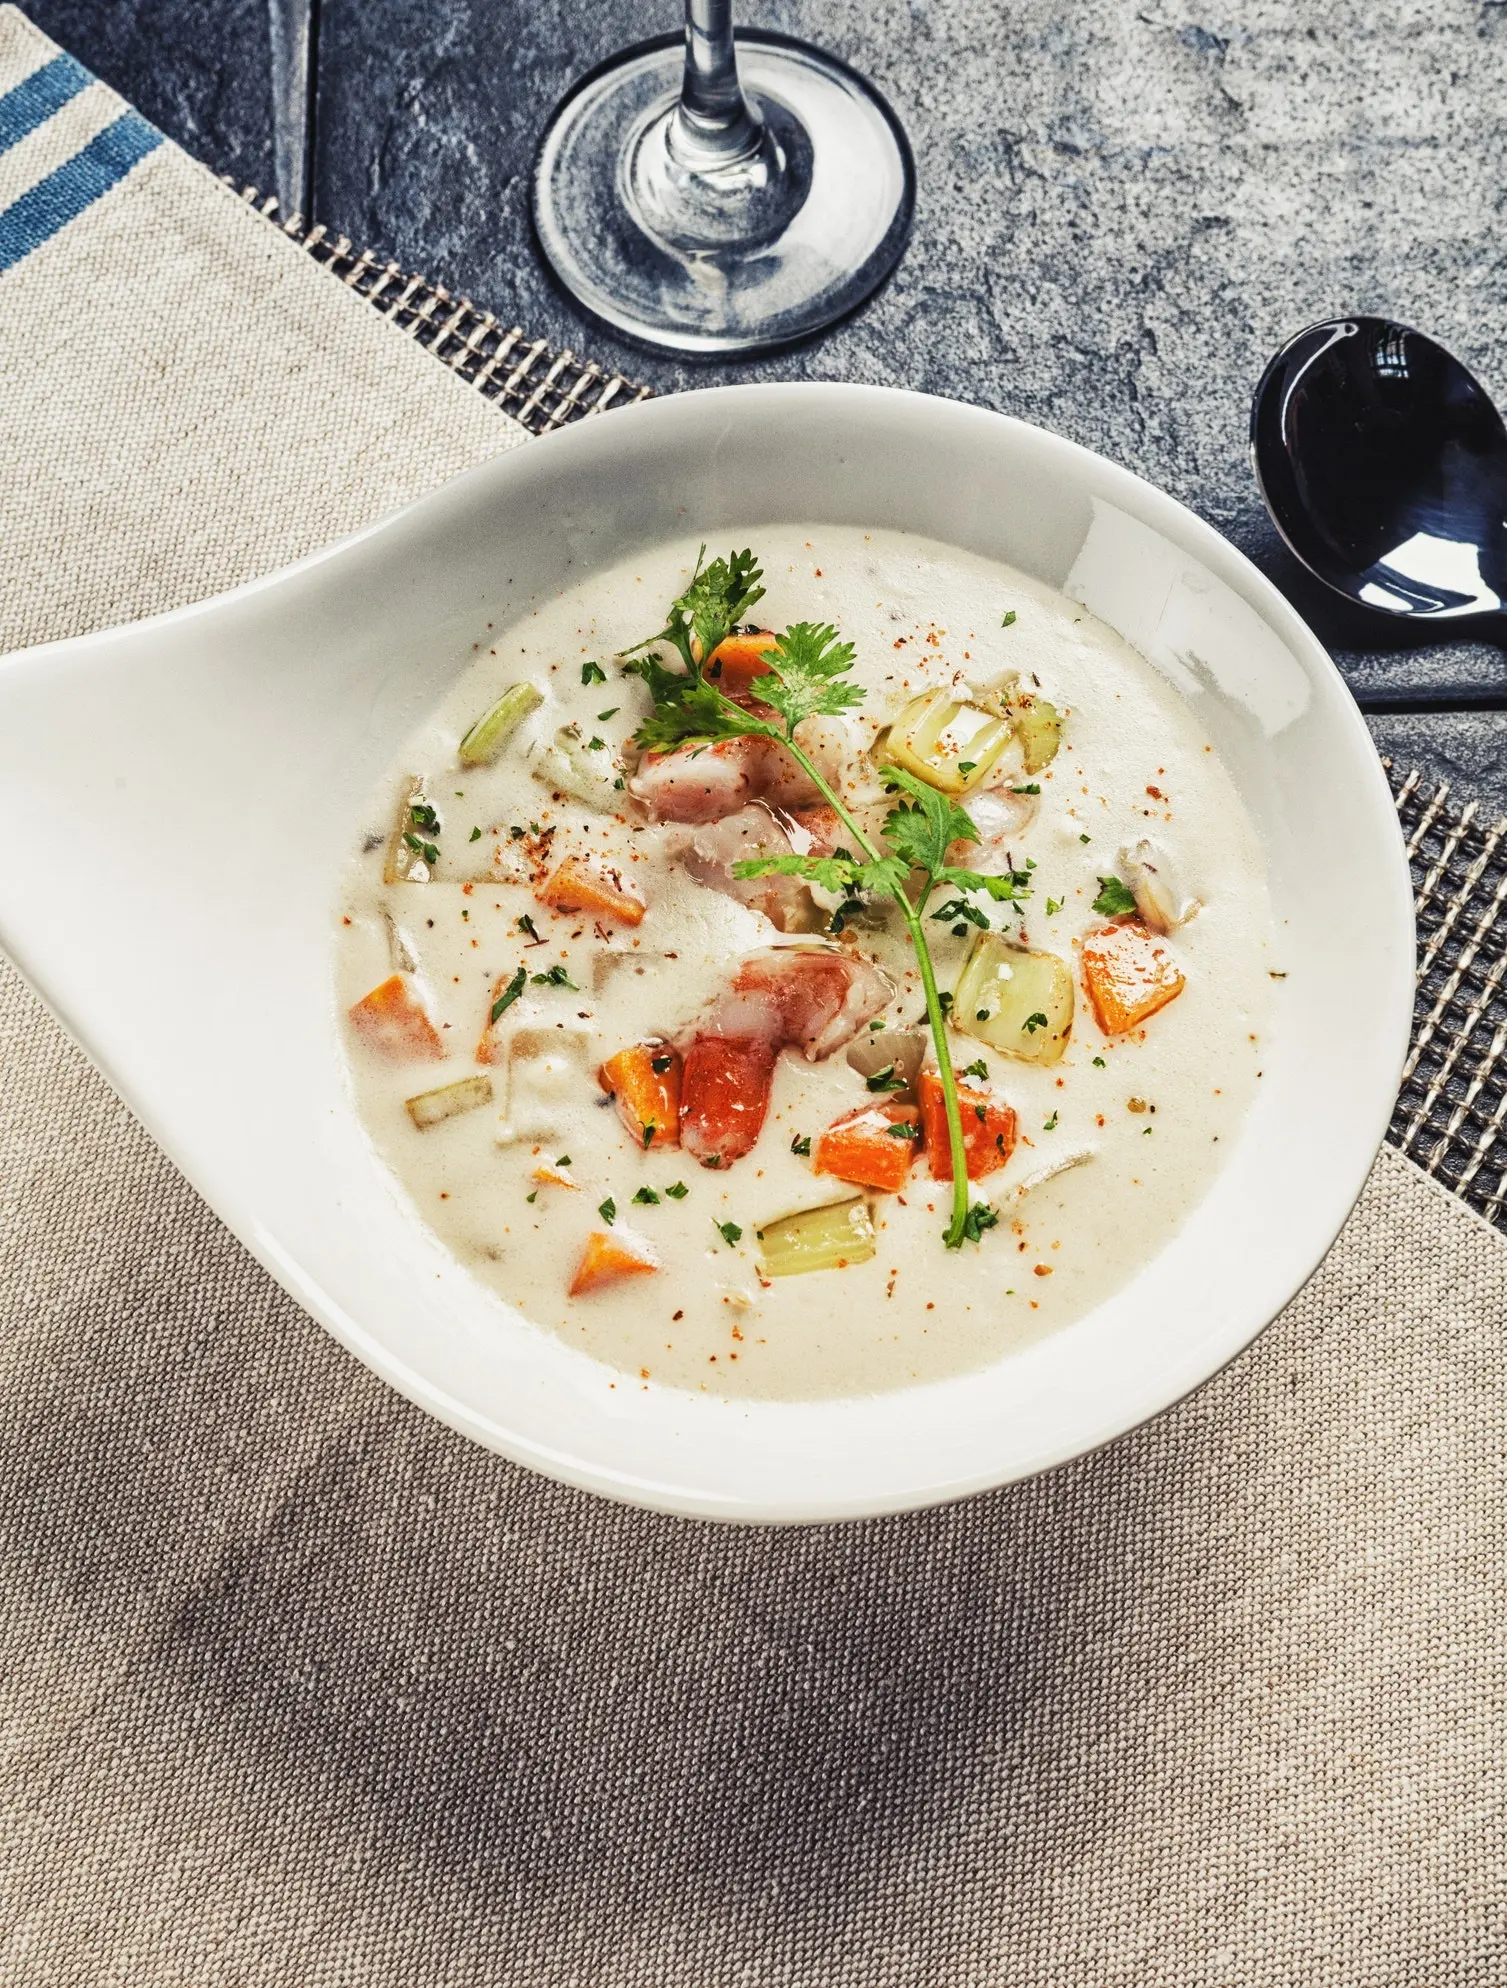 smoked seafood chowder - What makes chowder chowder instead of soup